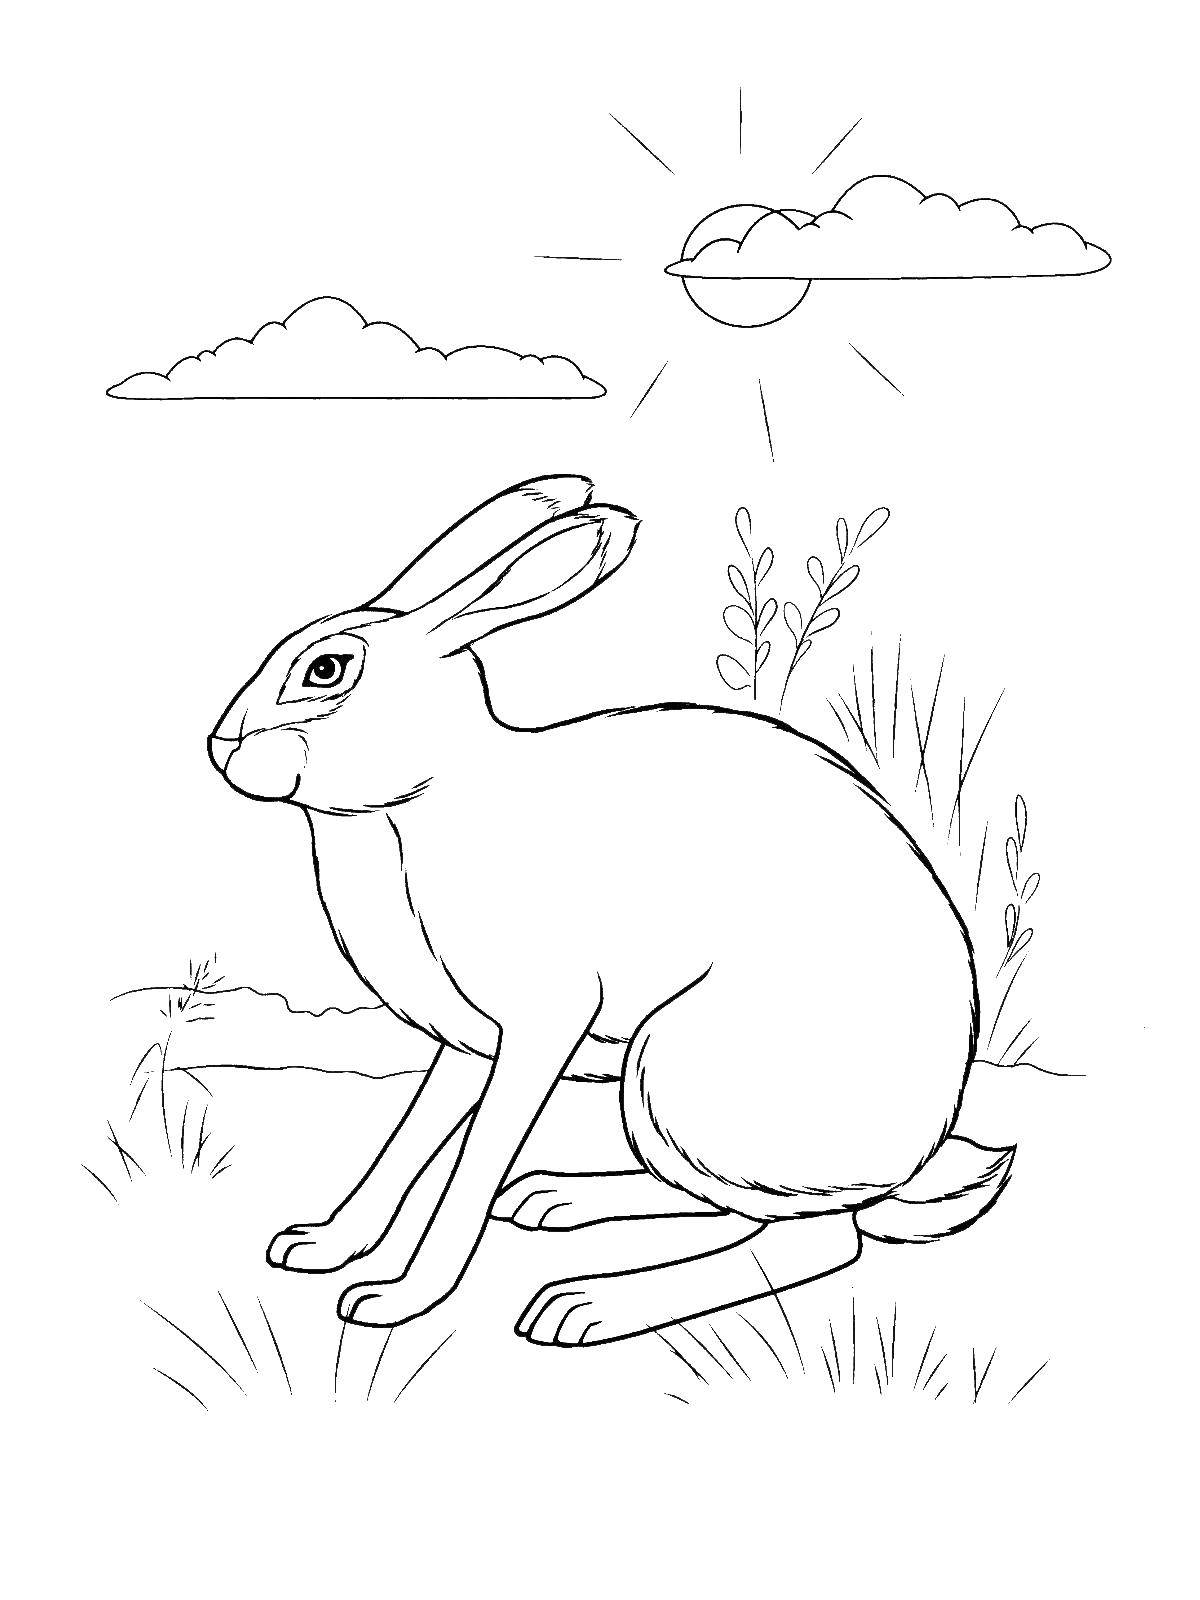 Coloring Rabbit. Category wild animals. Tags:  rabbit, hare.